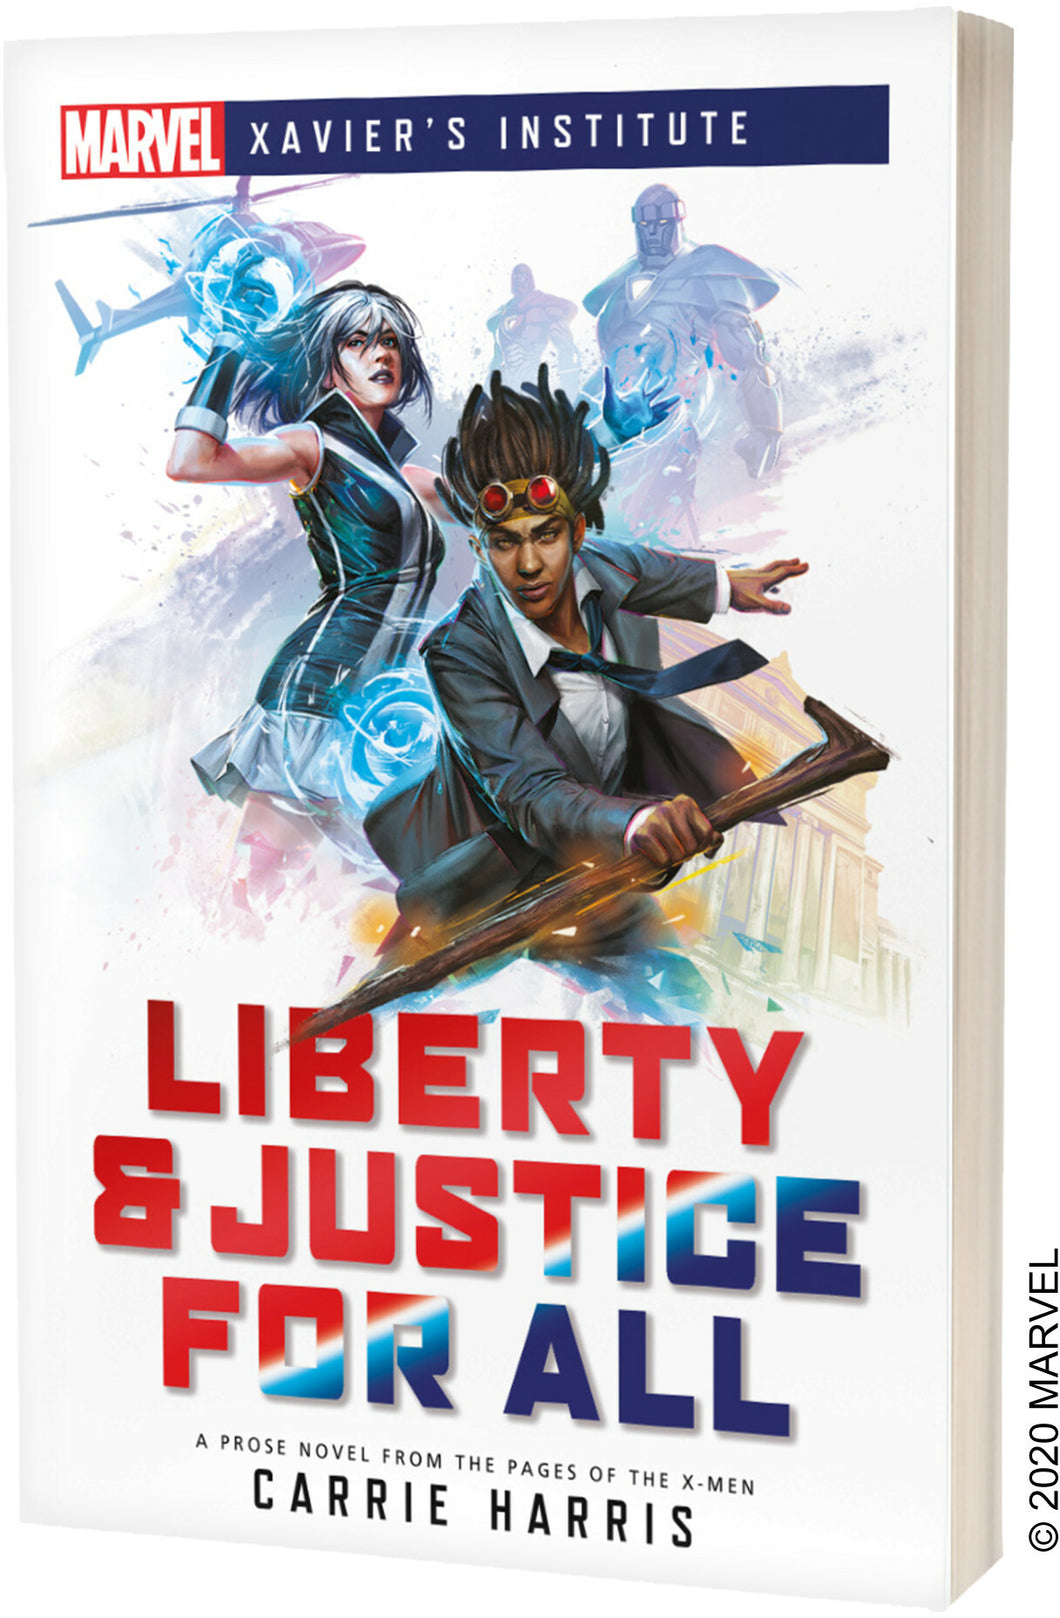 Marvel: Xavier's Institute: Liberty & Justice for All Novel